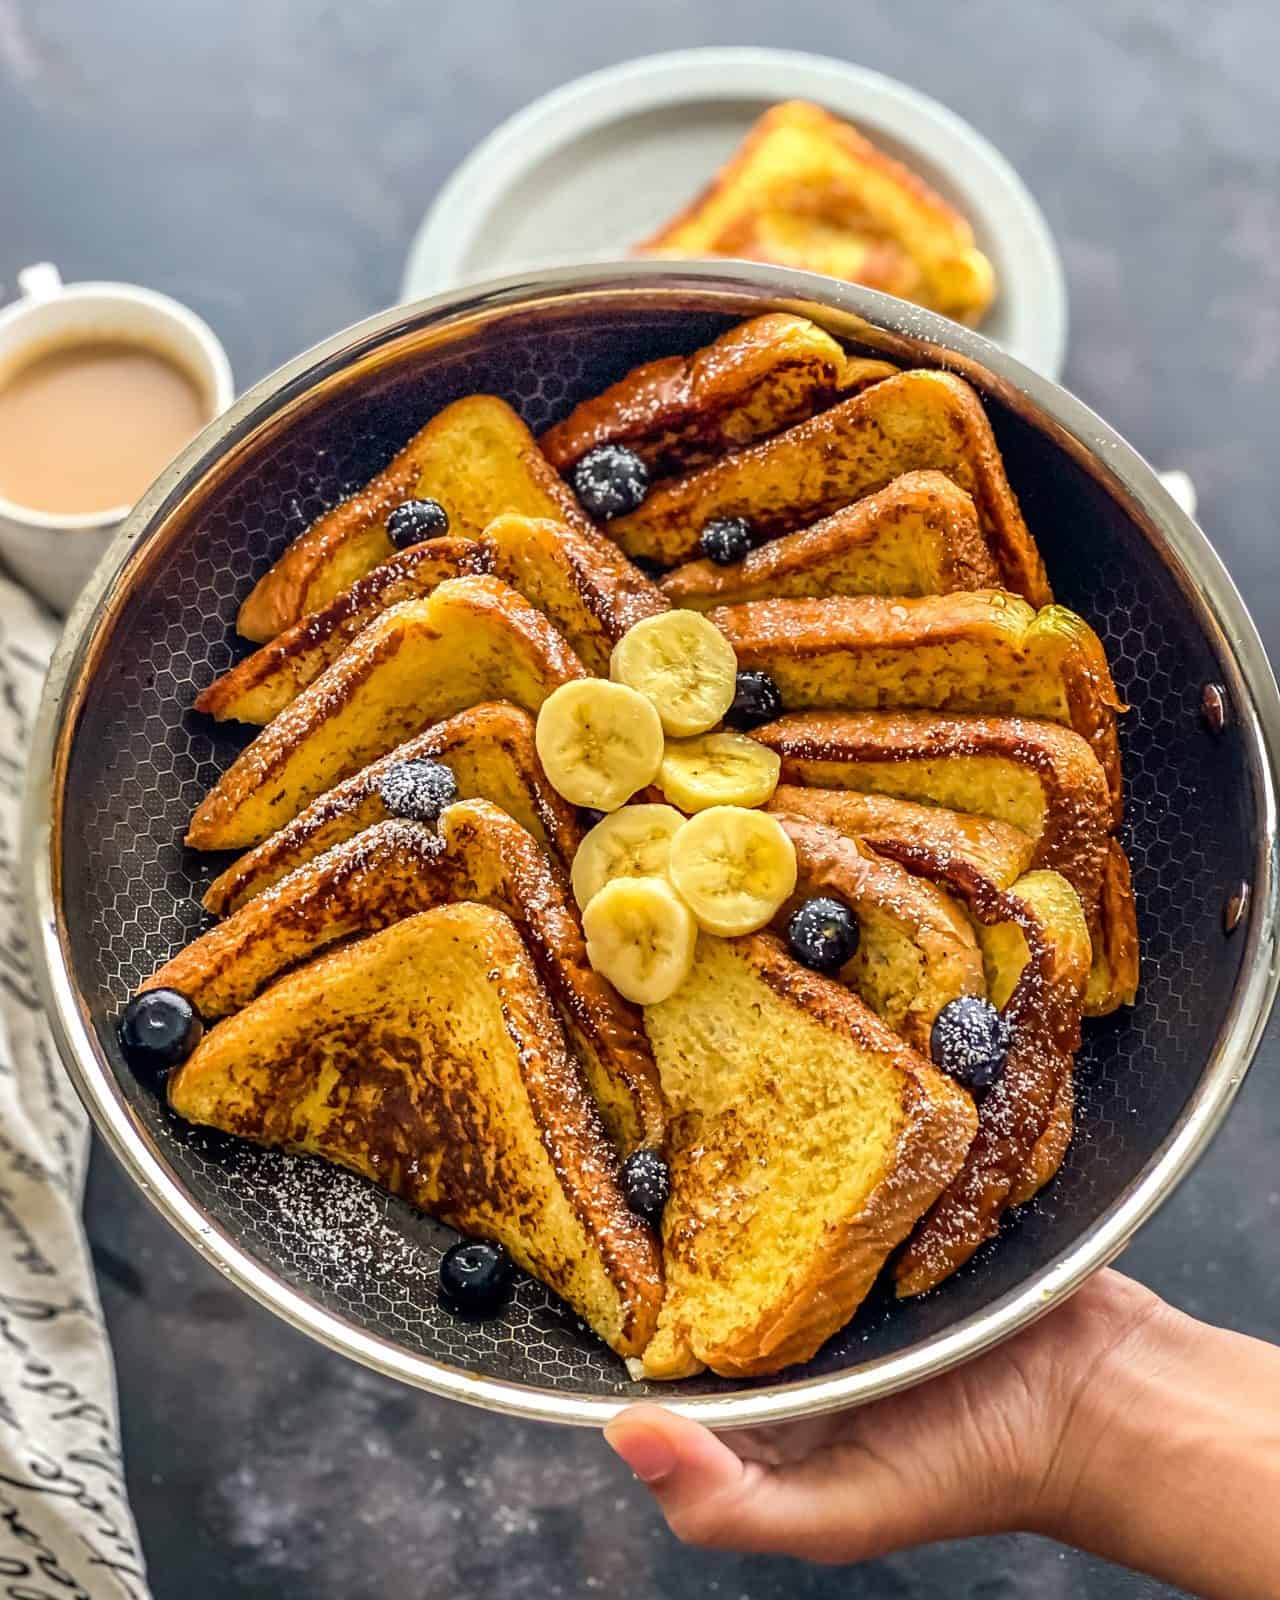 A silver pan with cut slices of french toast topped with blueberries and slices of banana.